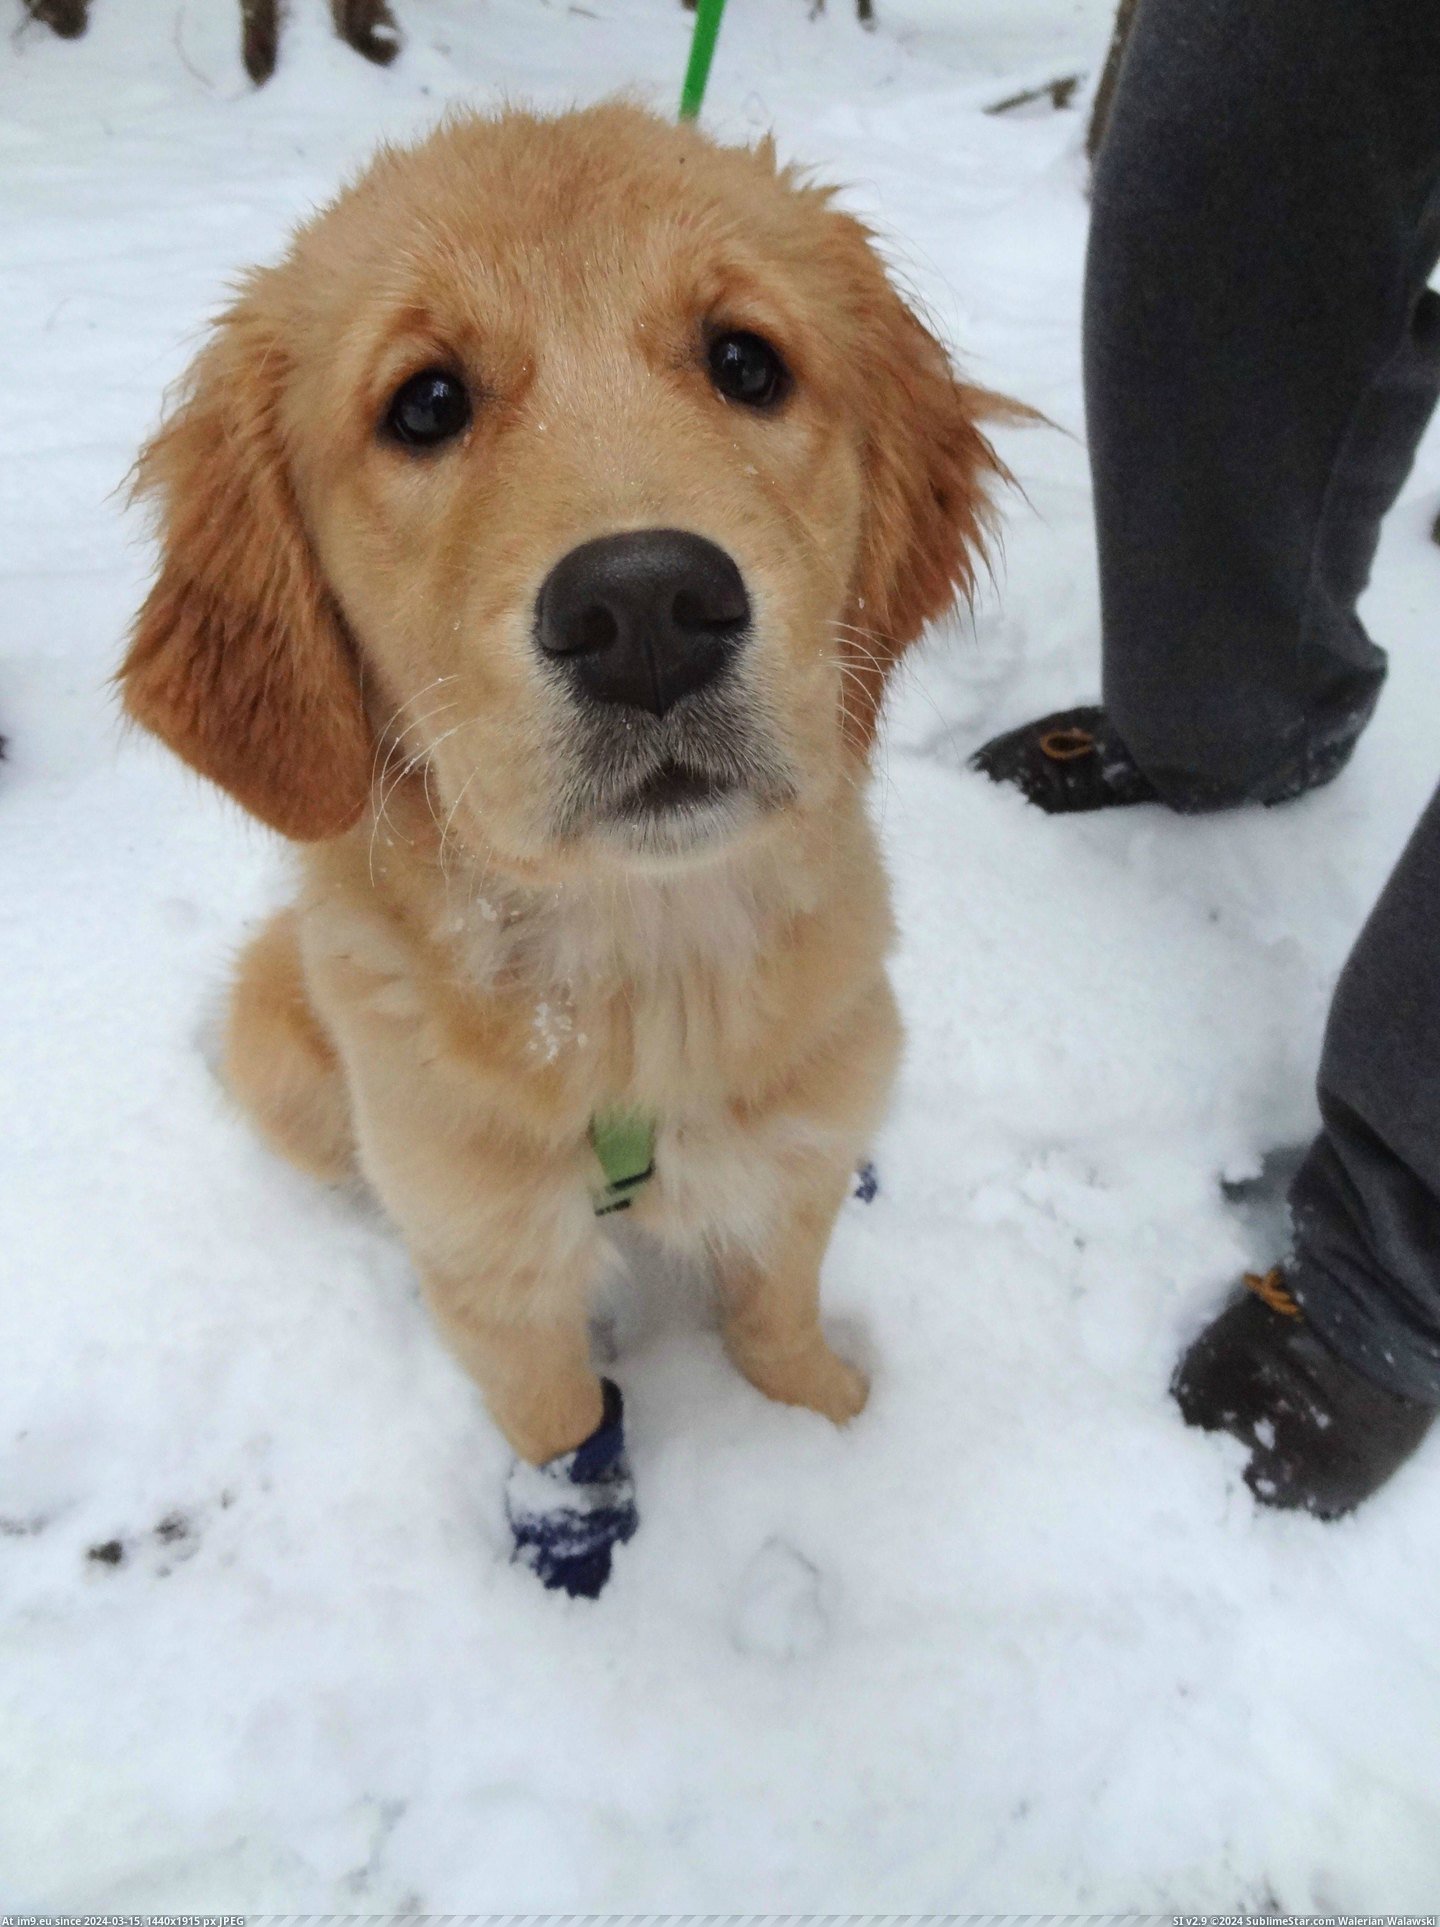 #One #Old #Eyes #Golden #Month #Walk #Booties #Our #Snow #Lost [Aww] My four-month-old Golden lost one of her booties on our walk in the snow. Those eyes! Pic. (Image of album My r/AWW favs))